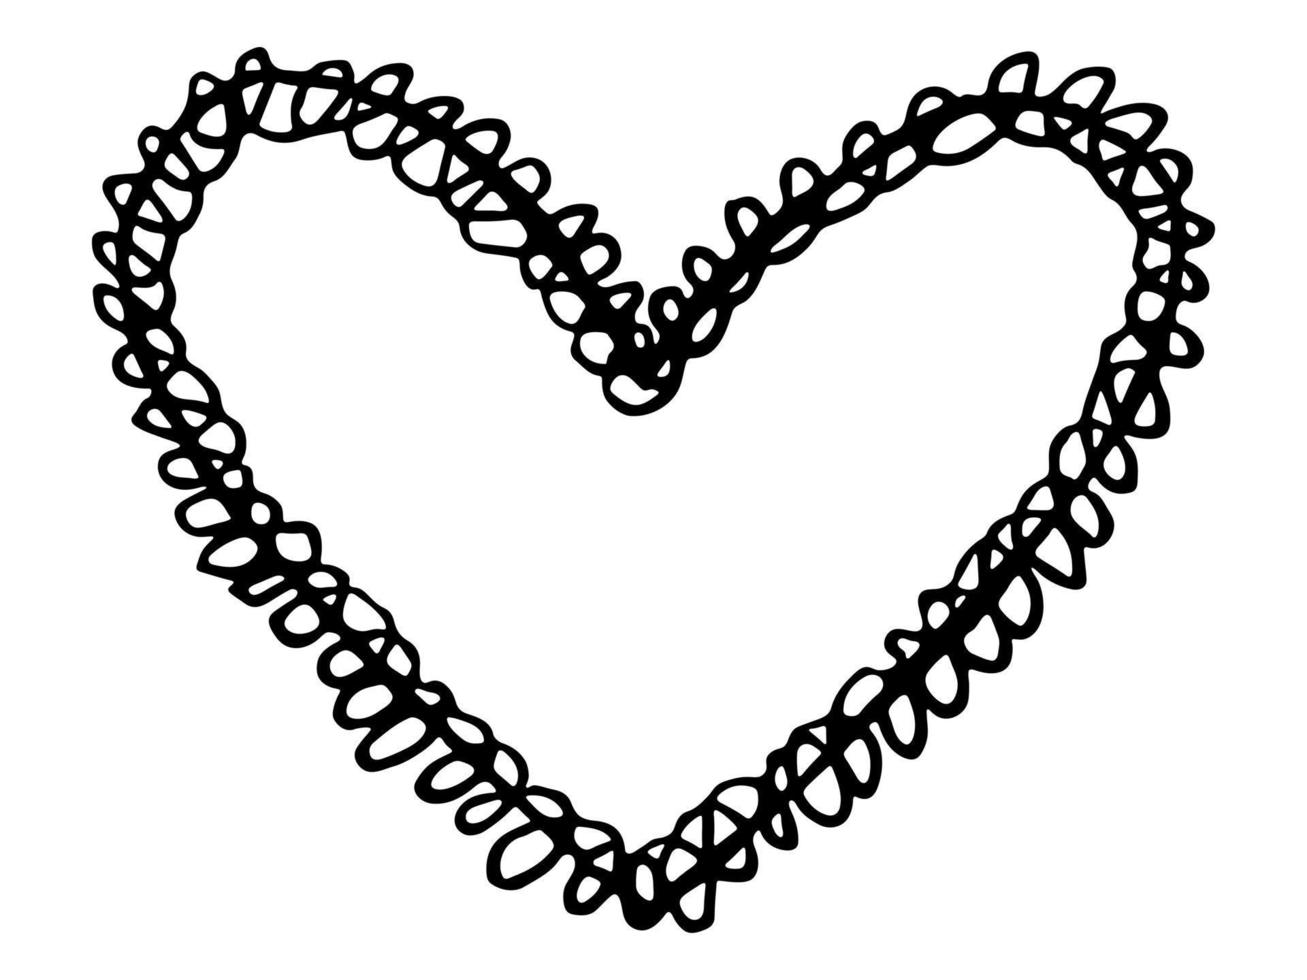 Simple hand drawn heart illustration. Cute valentine's day heart doodle. Love clipart vector